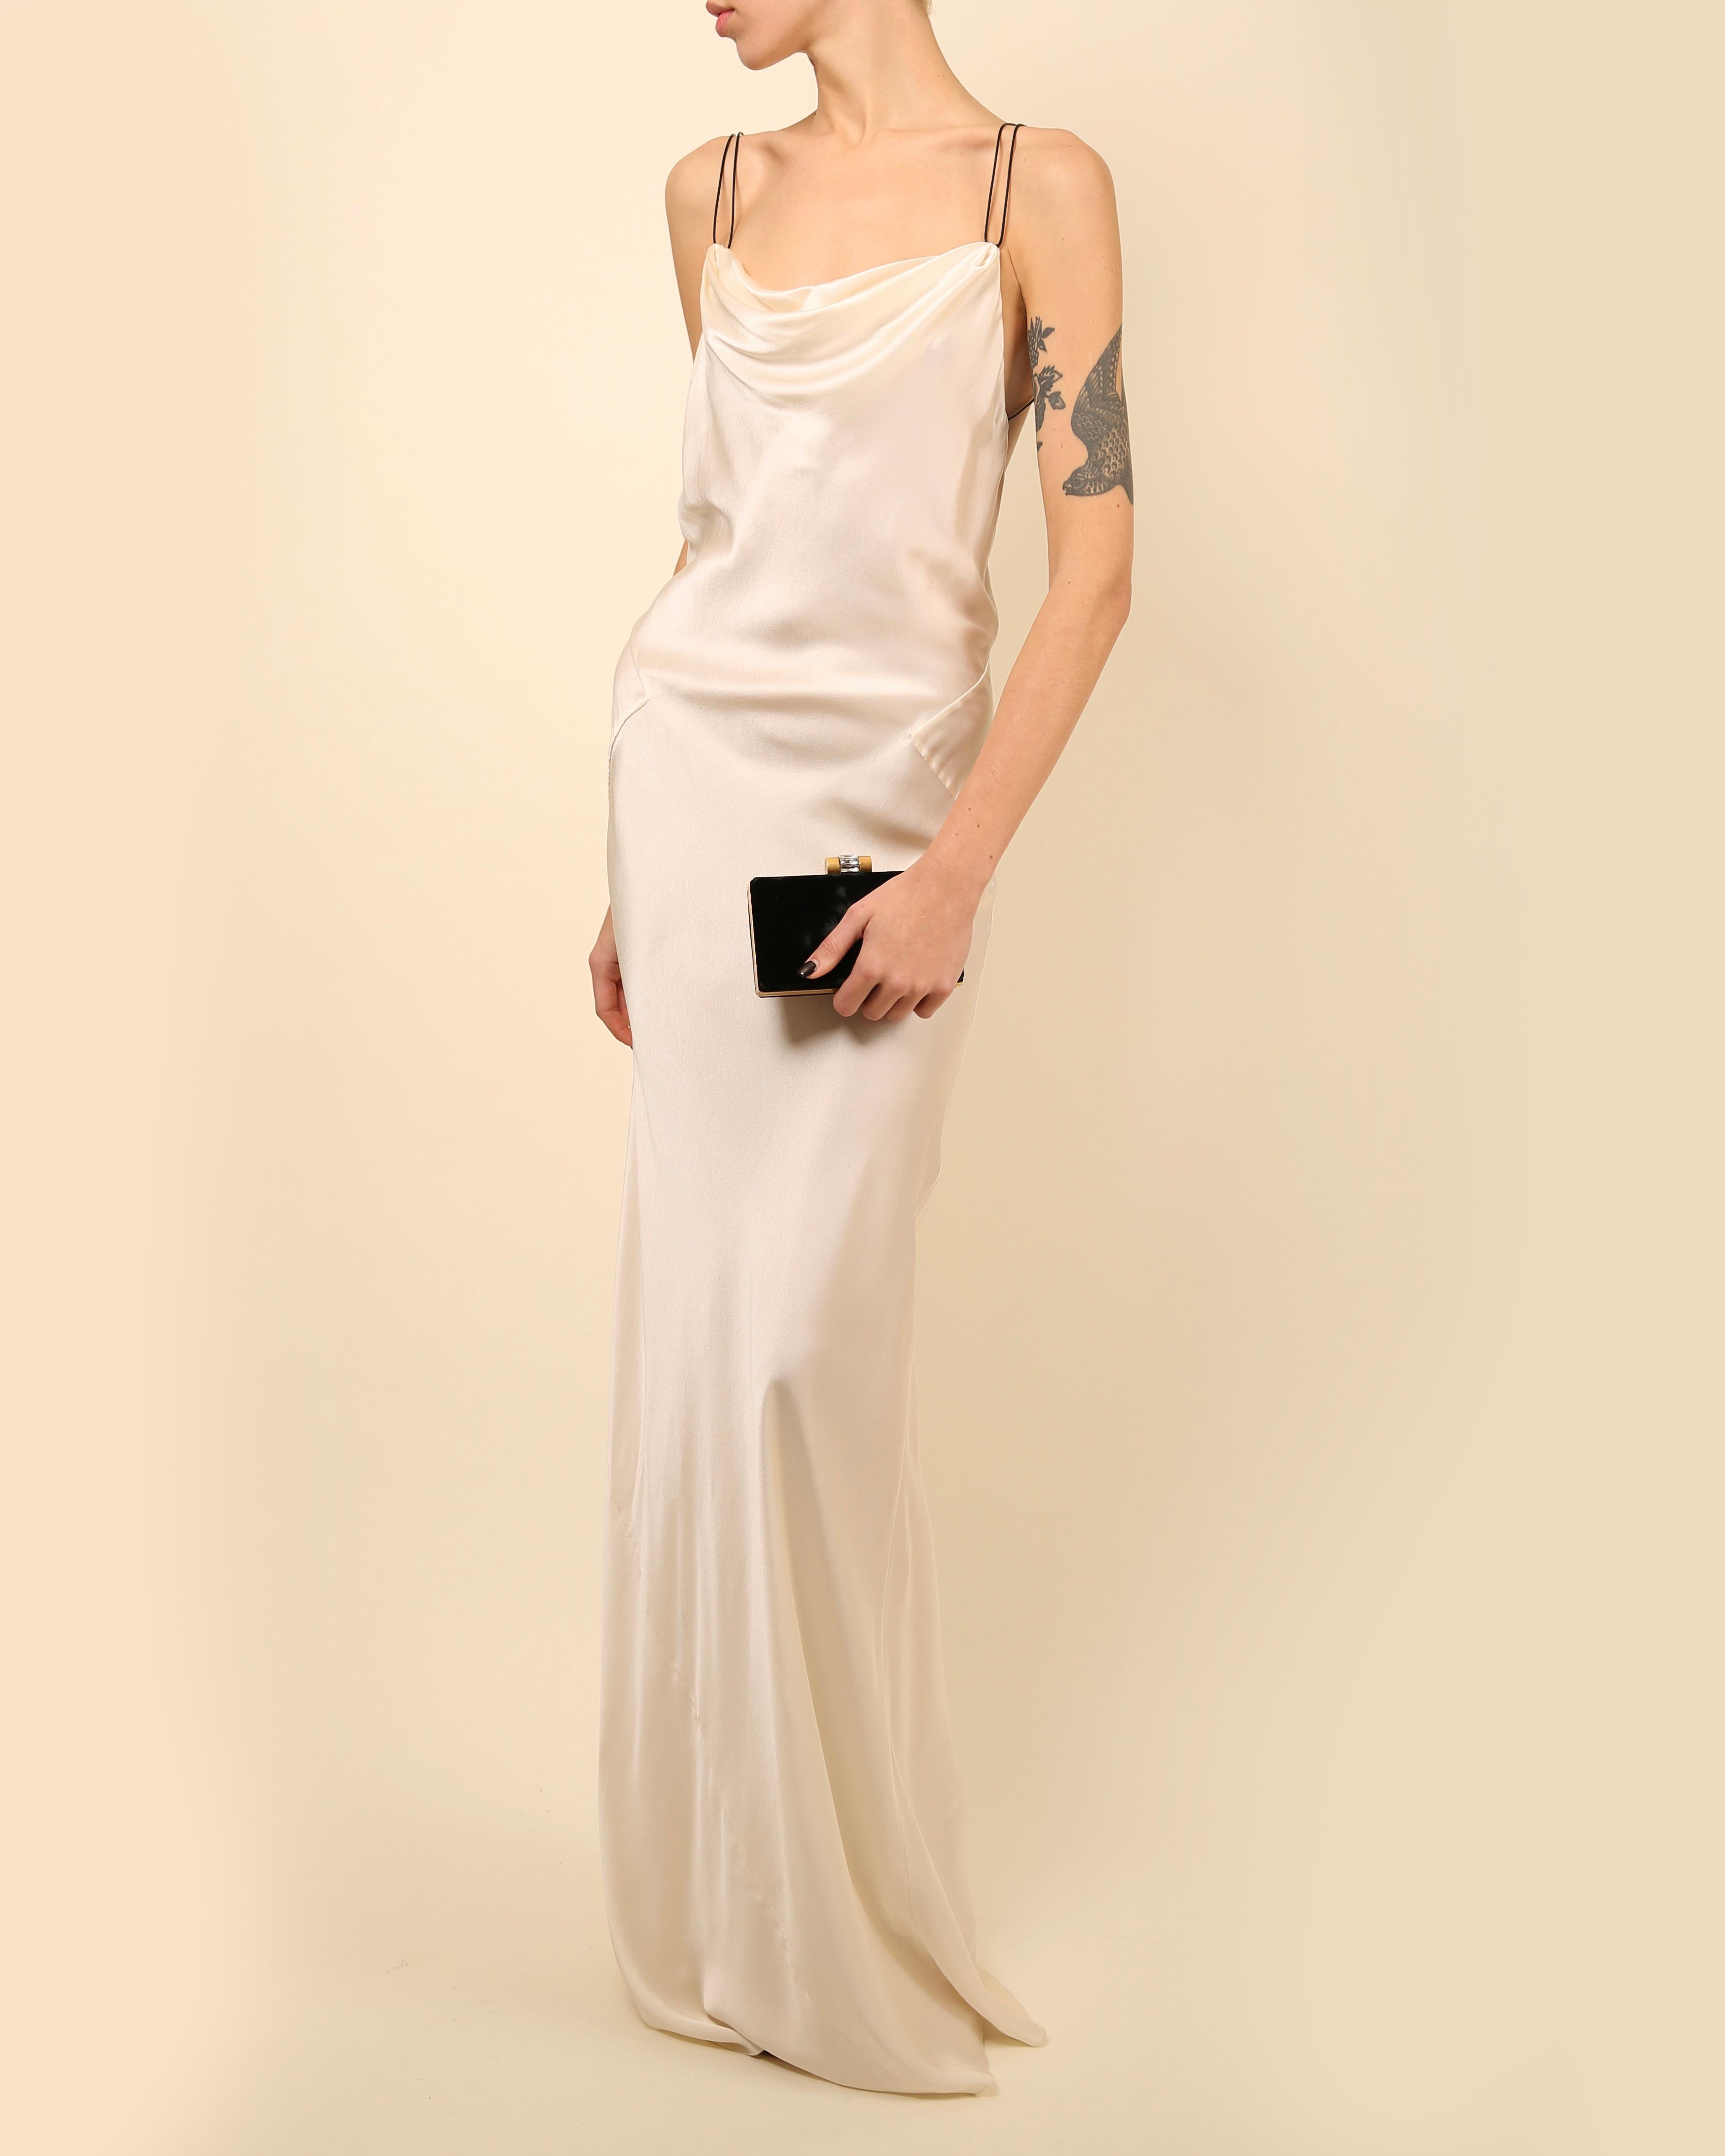 LOVE LALI Vintage

Jason Wu floor length ivory silk gown in the style of a slinky slip dress
Double mock leather straps that cross over at the back
Cowl neck line 
Beautiful open back
Slight train
Beautiful worn as a wedding dress or in the summer